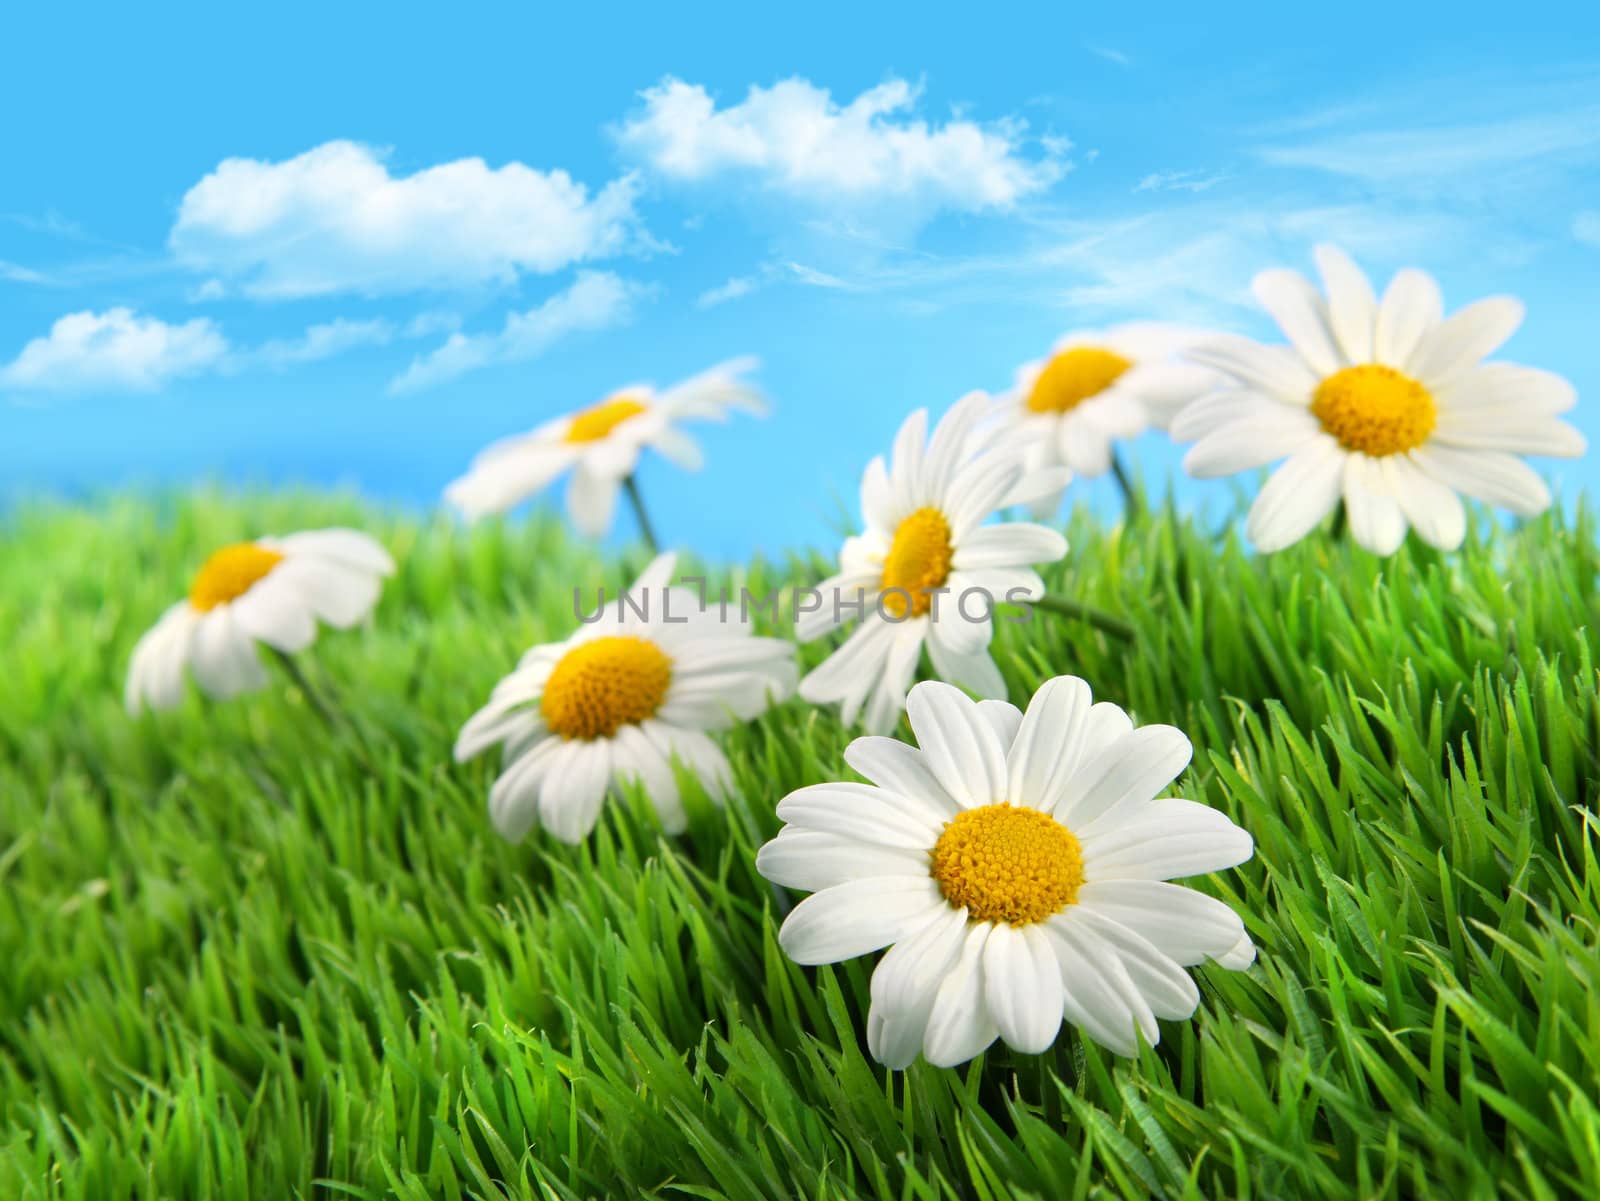 Little daisies in grass against a blue sky